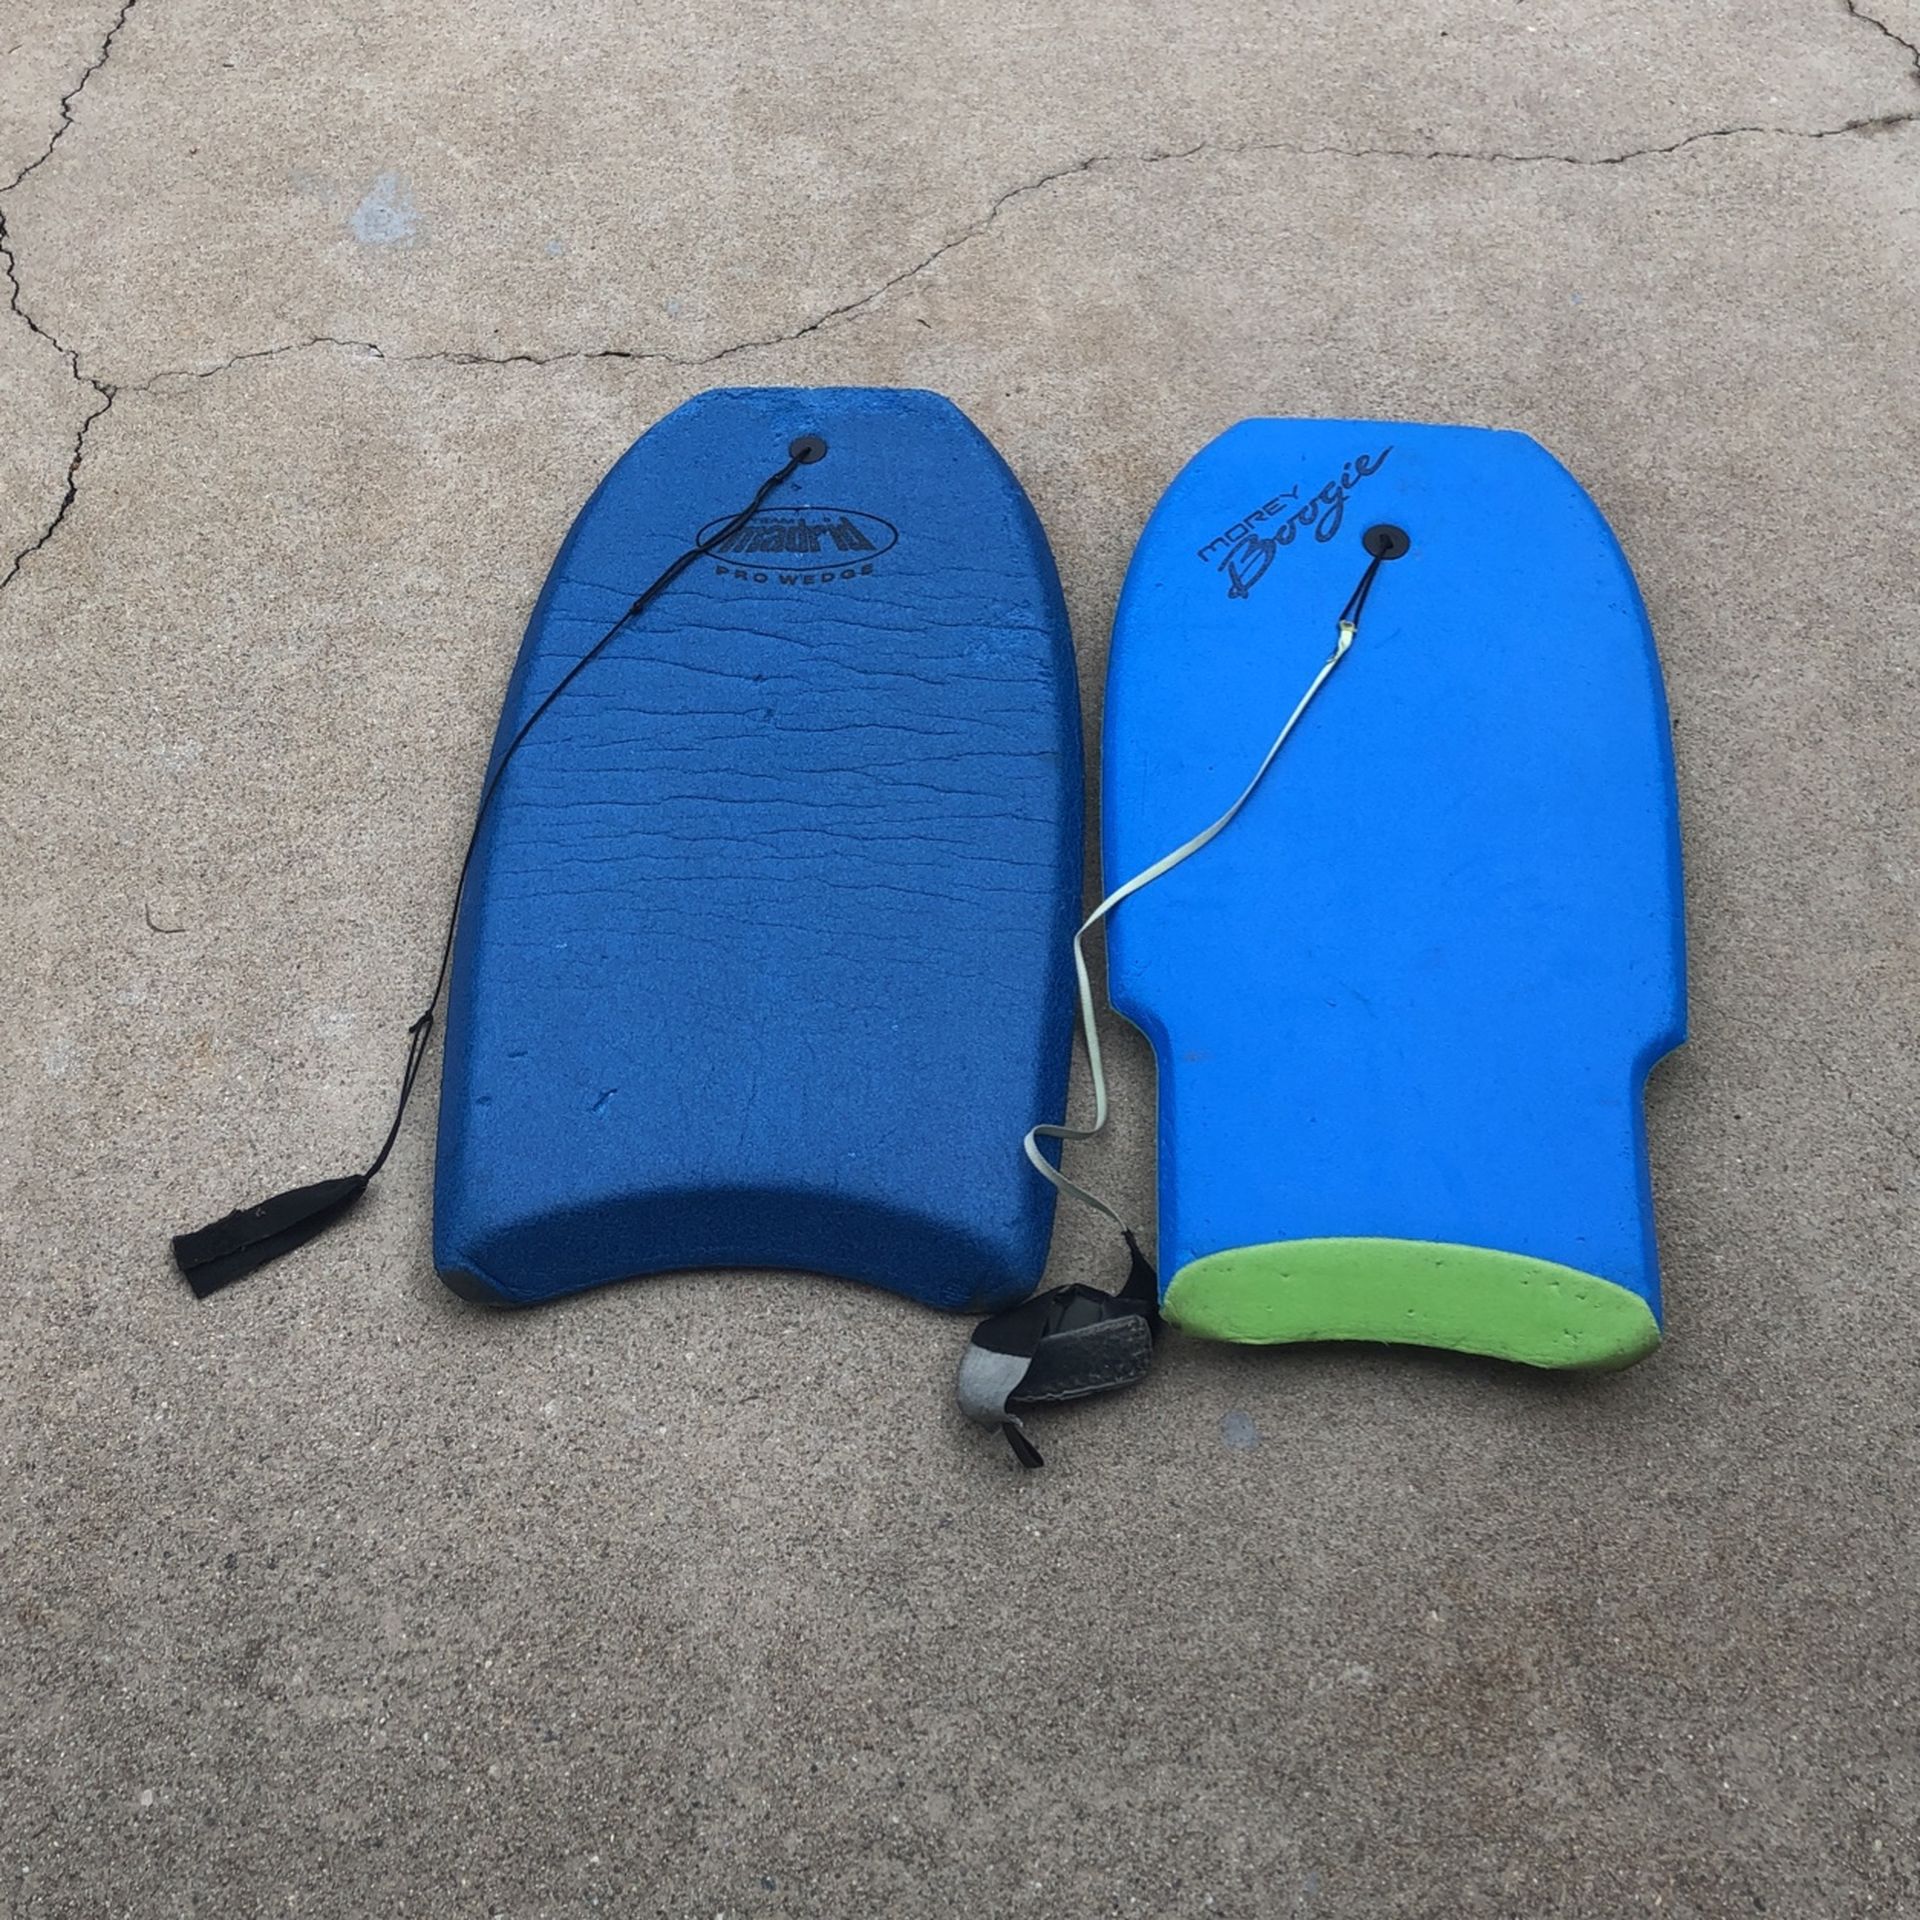 Boogie Boards (both For $10)